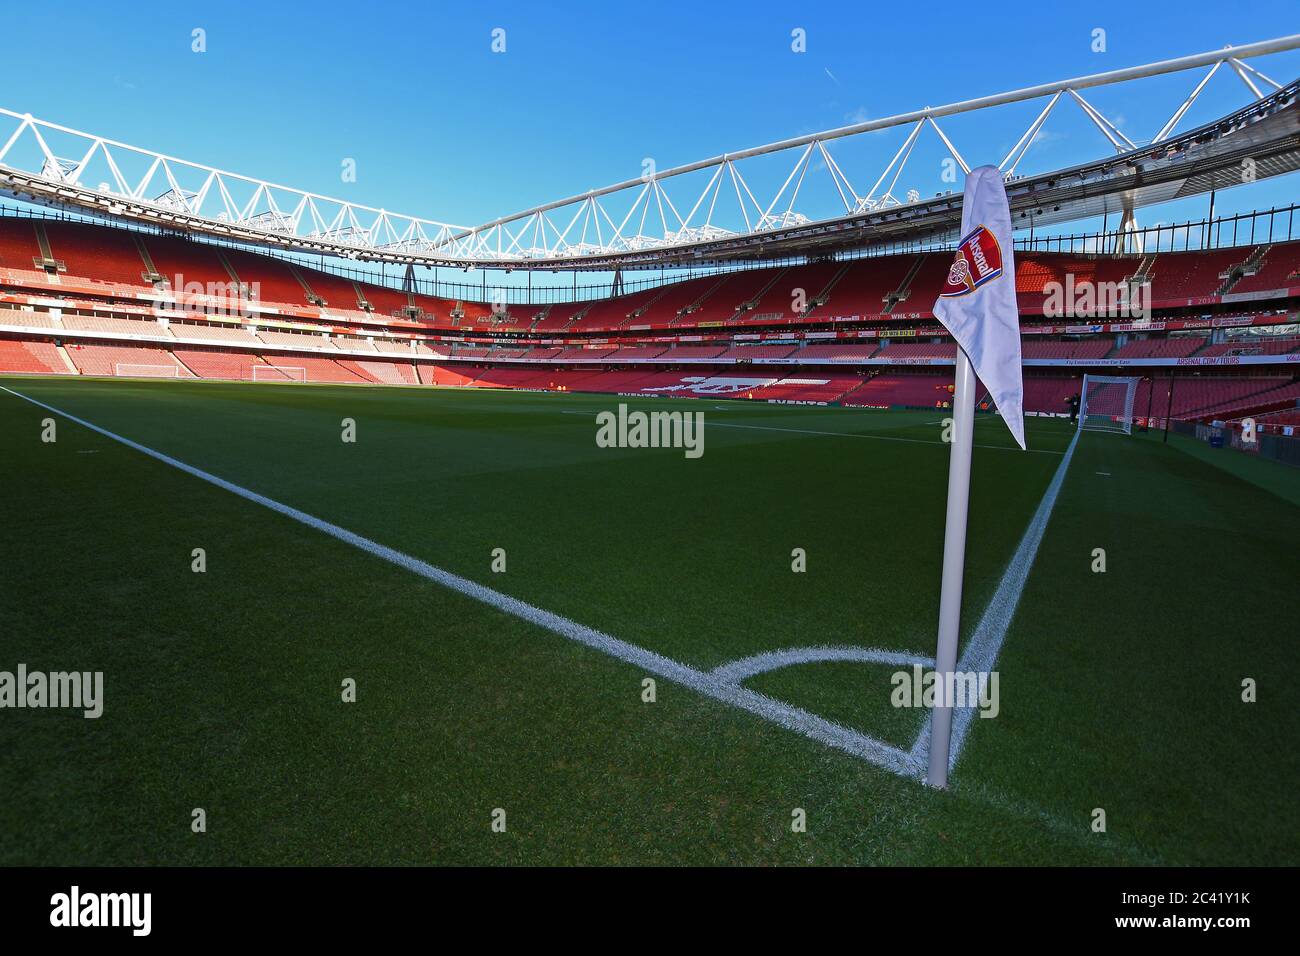 LONDON, ENGLAND - JANUARY 18, 2020: General view of the venuea seen ahead of the 2019/20 Premier League game between Arsenal FC and Sheffield United FC at Emirates Stadium. Stock Photo